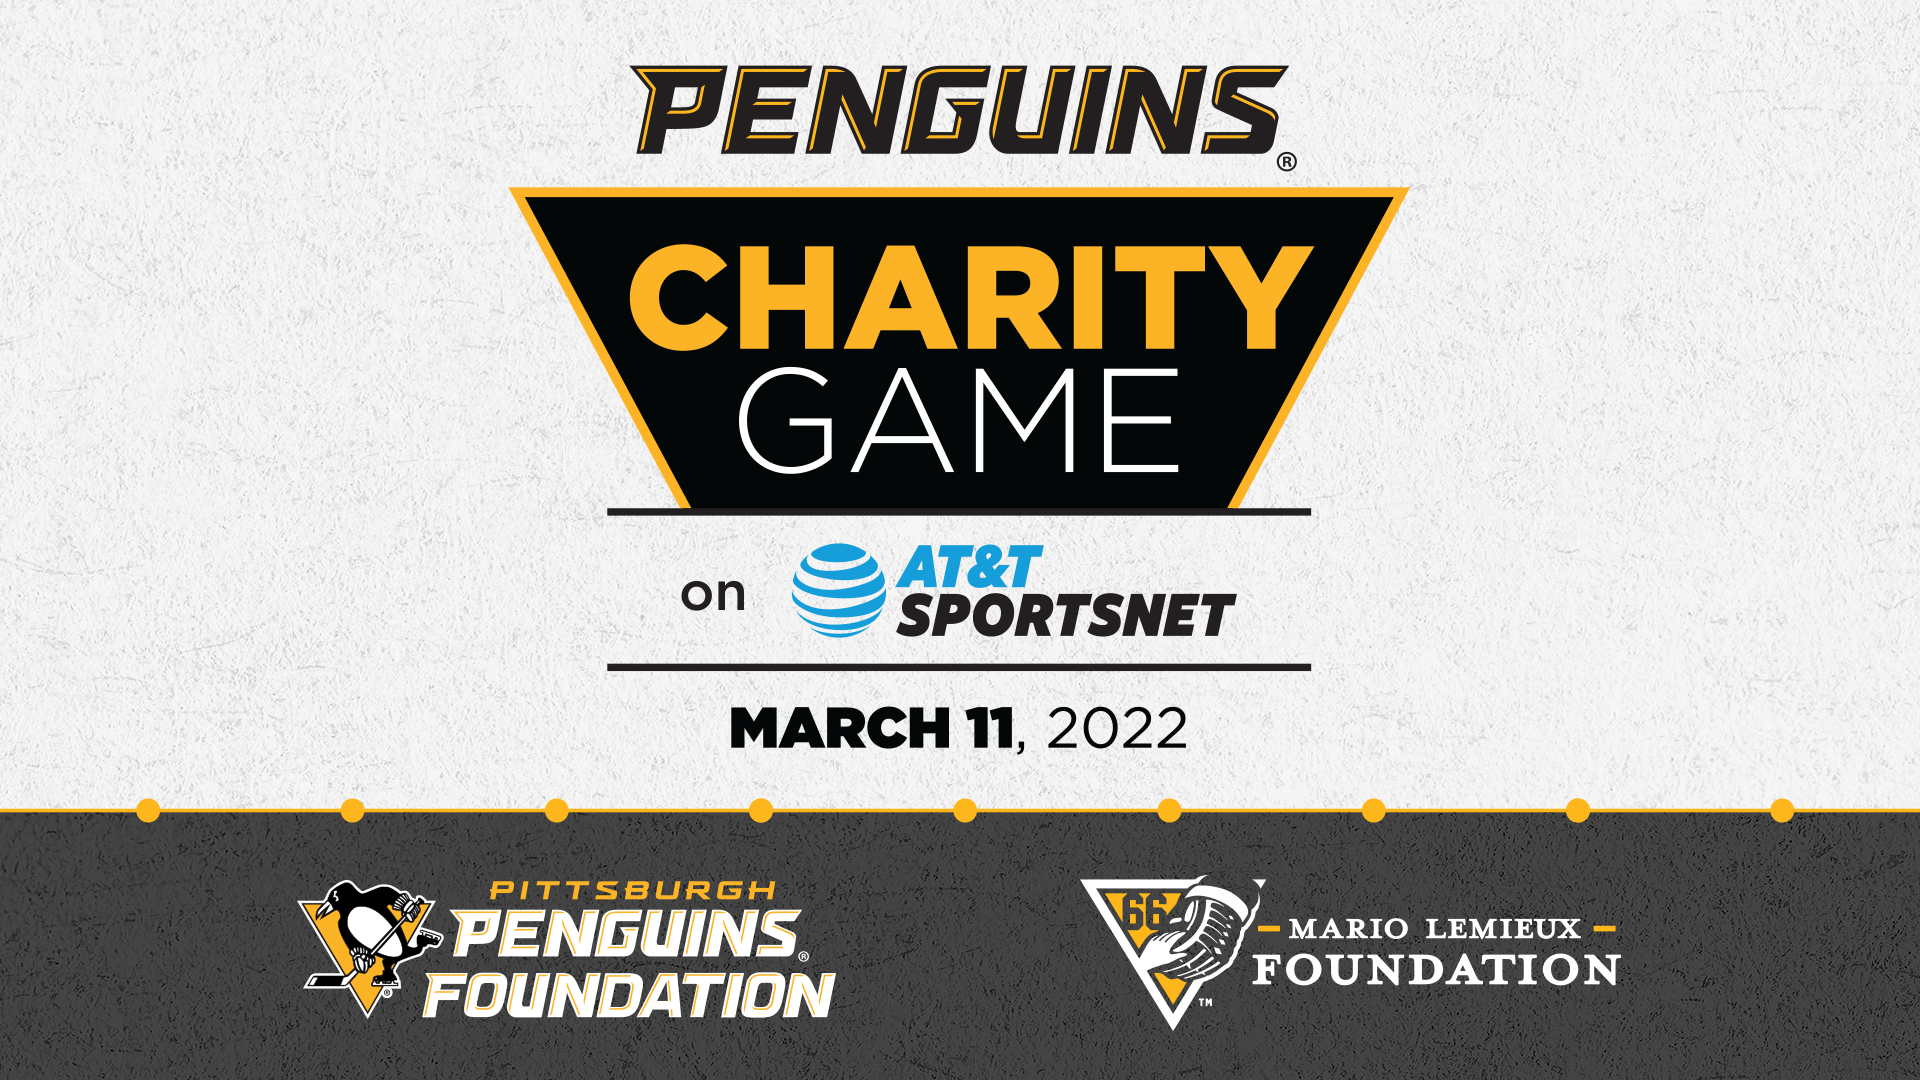 Penguins Charity Game